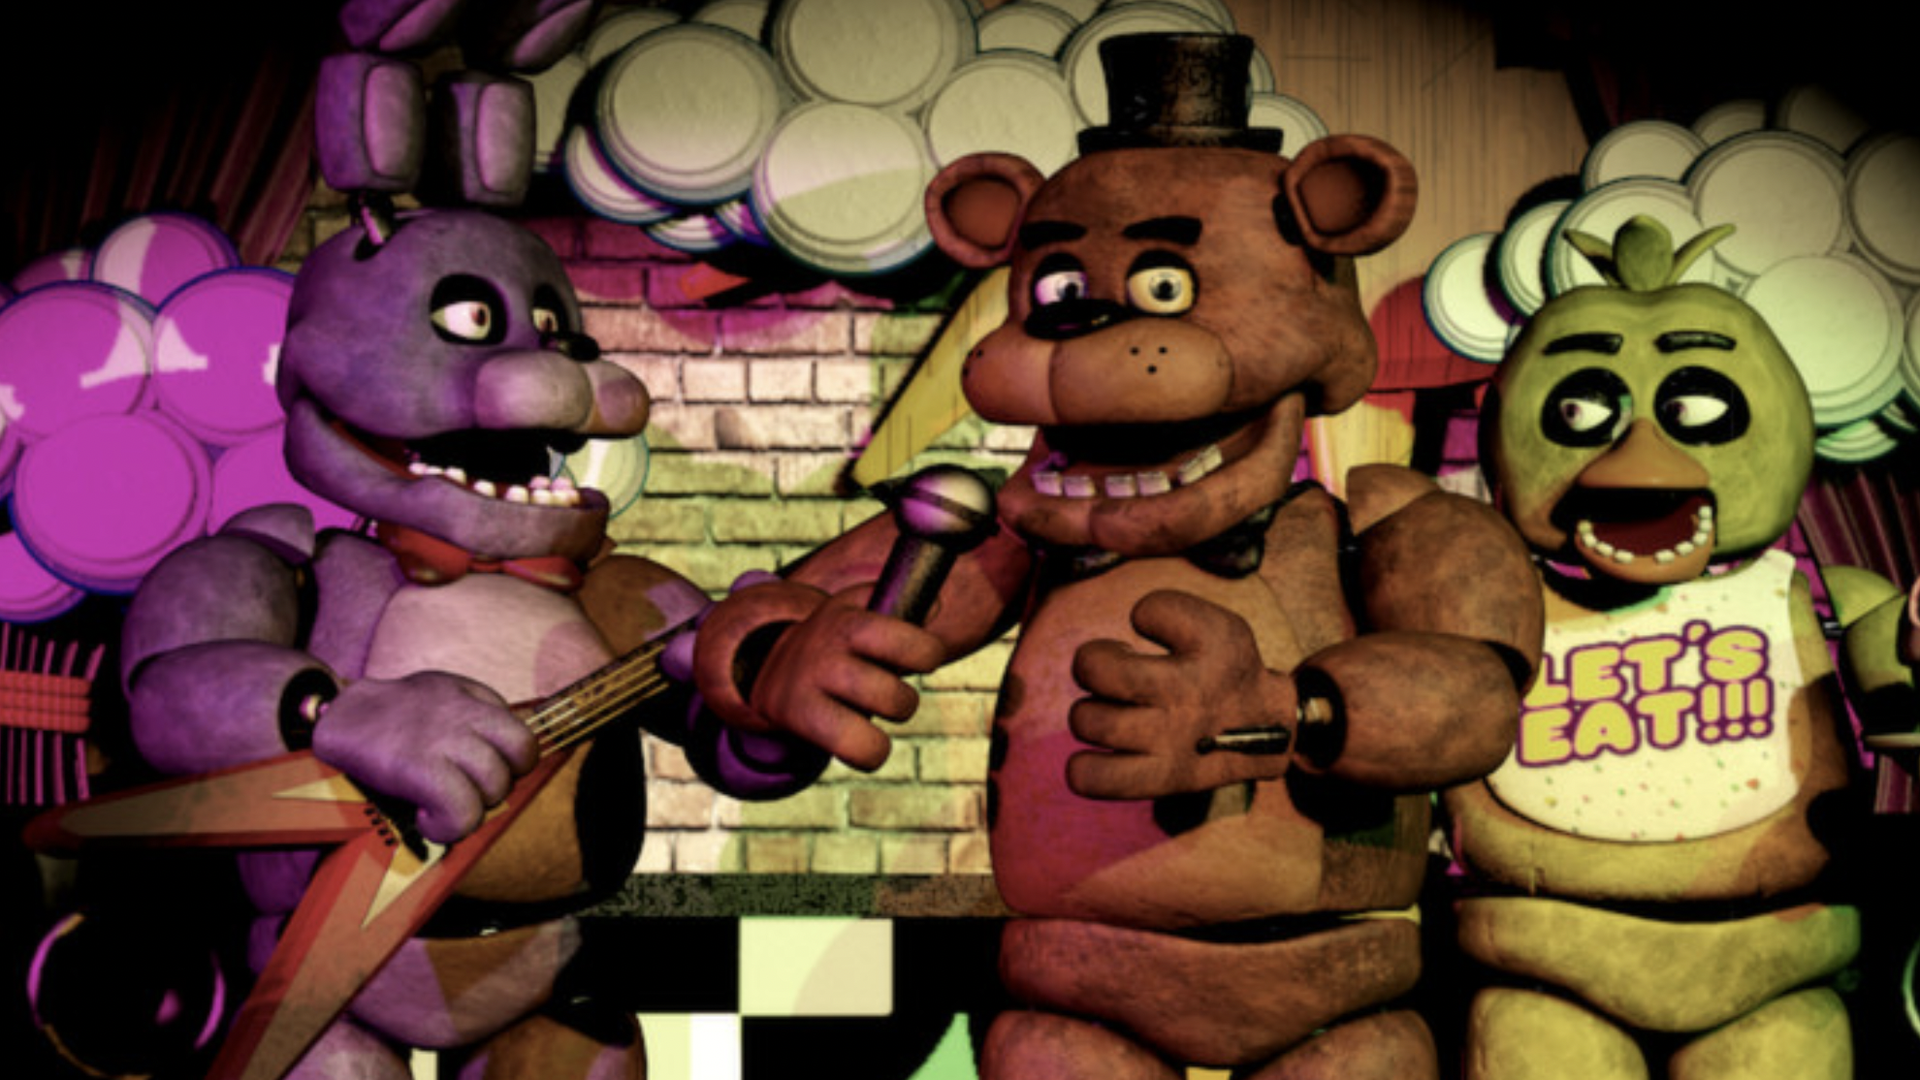 Picture of characters from five nights at freddys